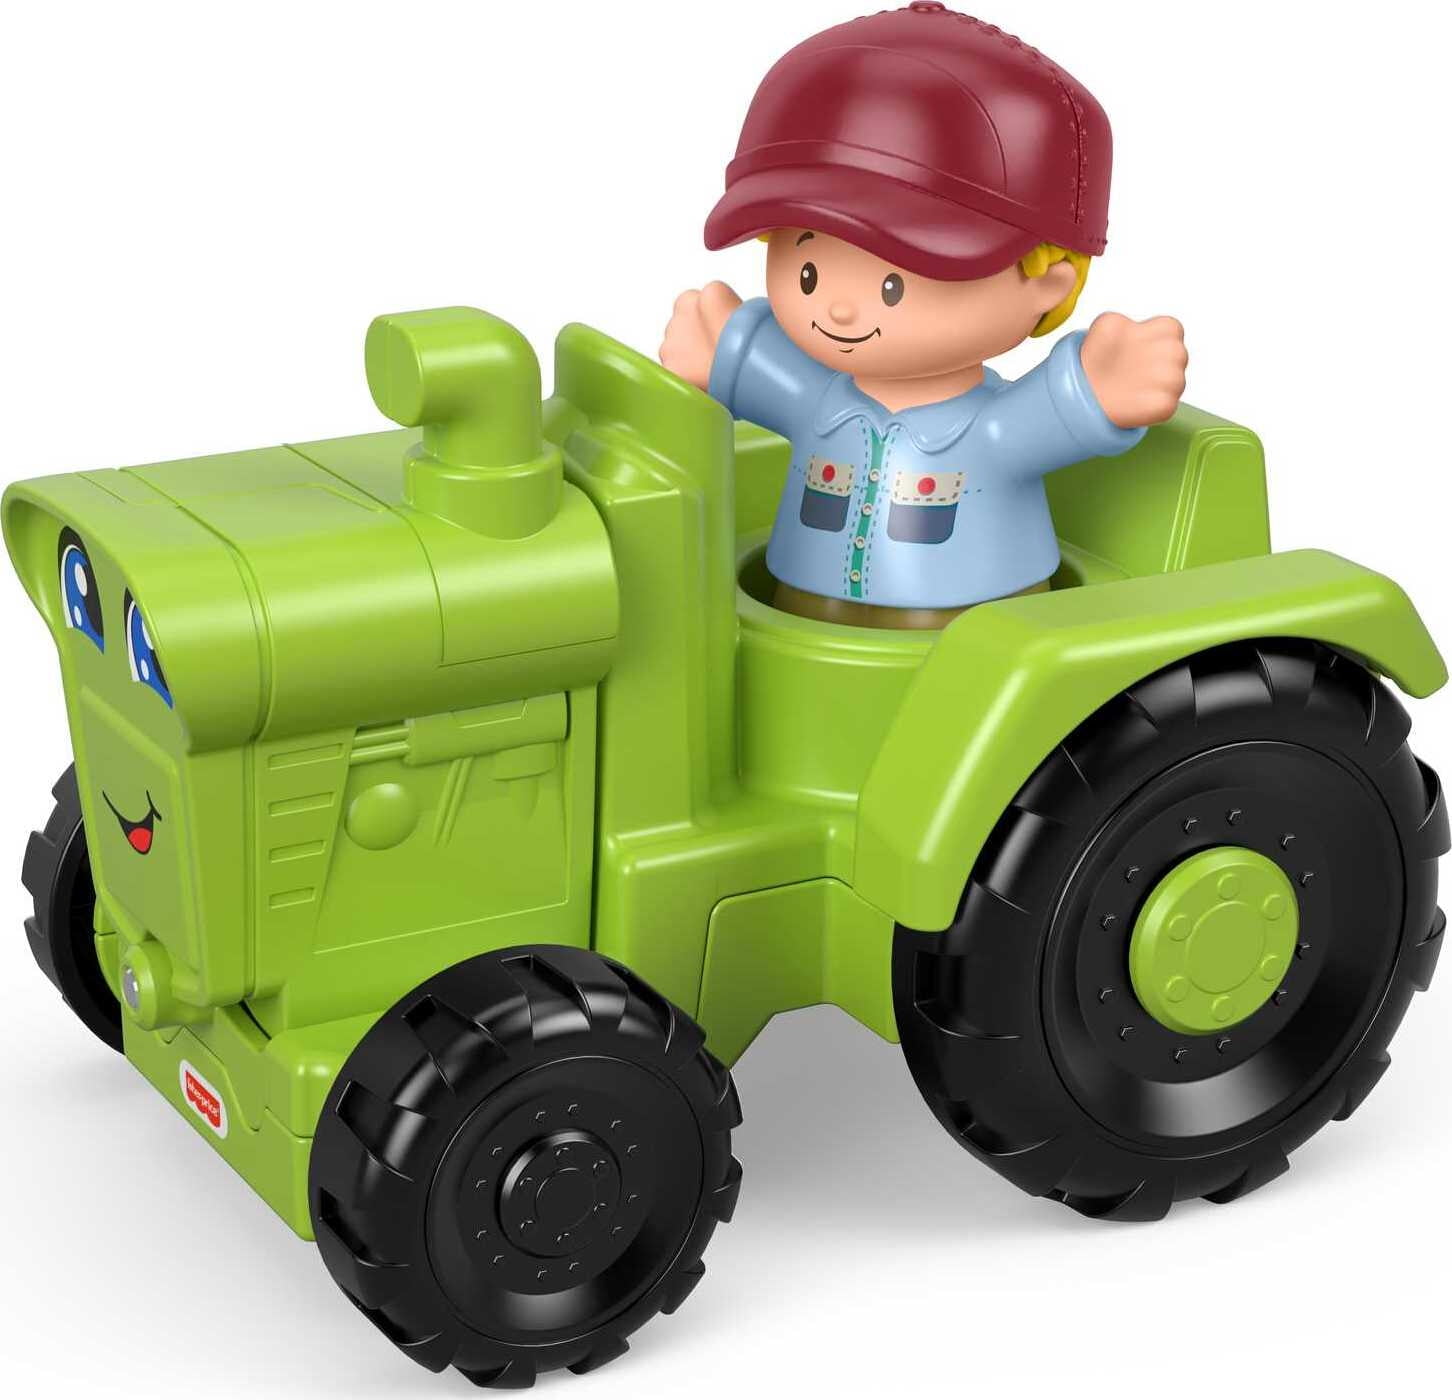 Fisher-Price Little People Helpful Harvester Tractor Vehicle & Farmer Figure for Toddlers